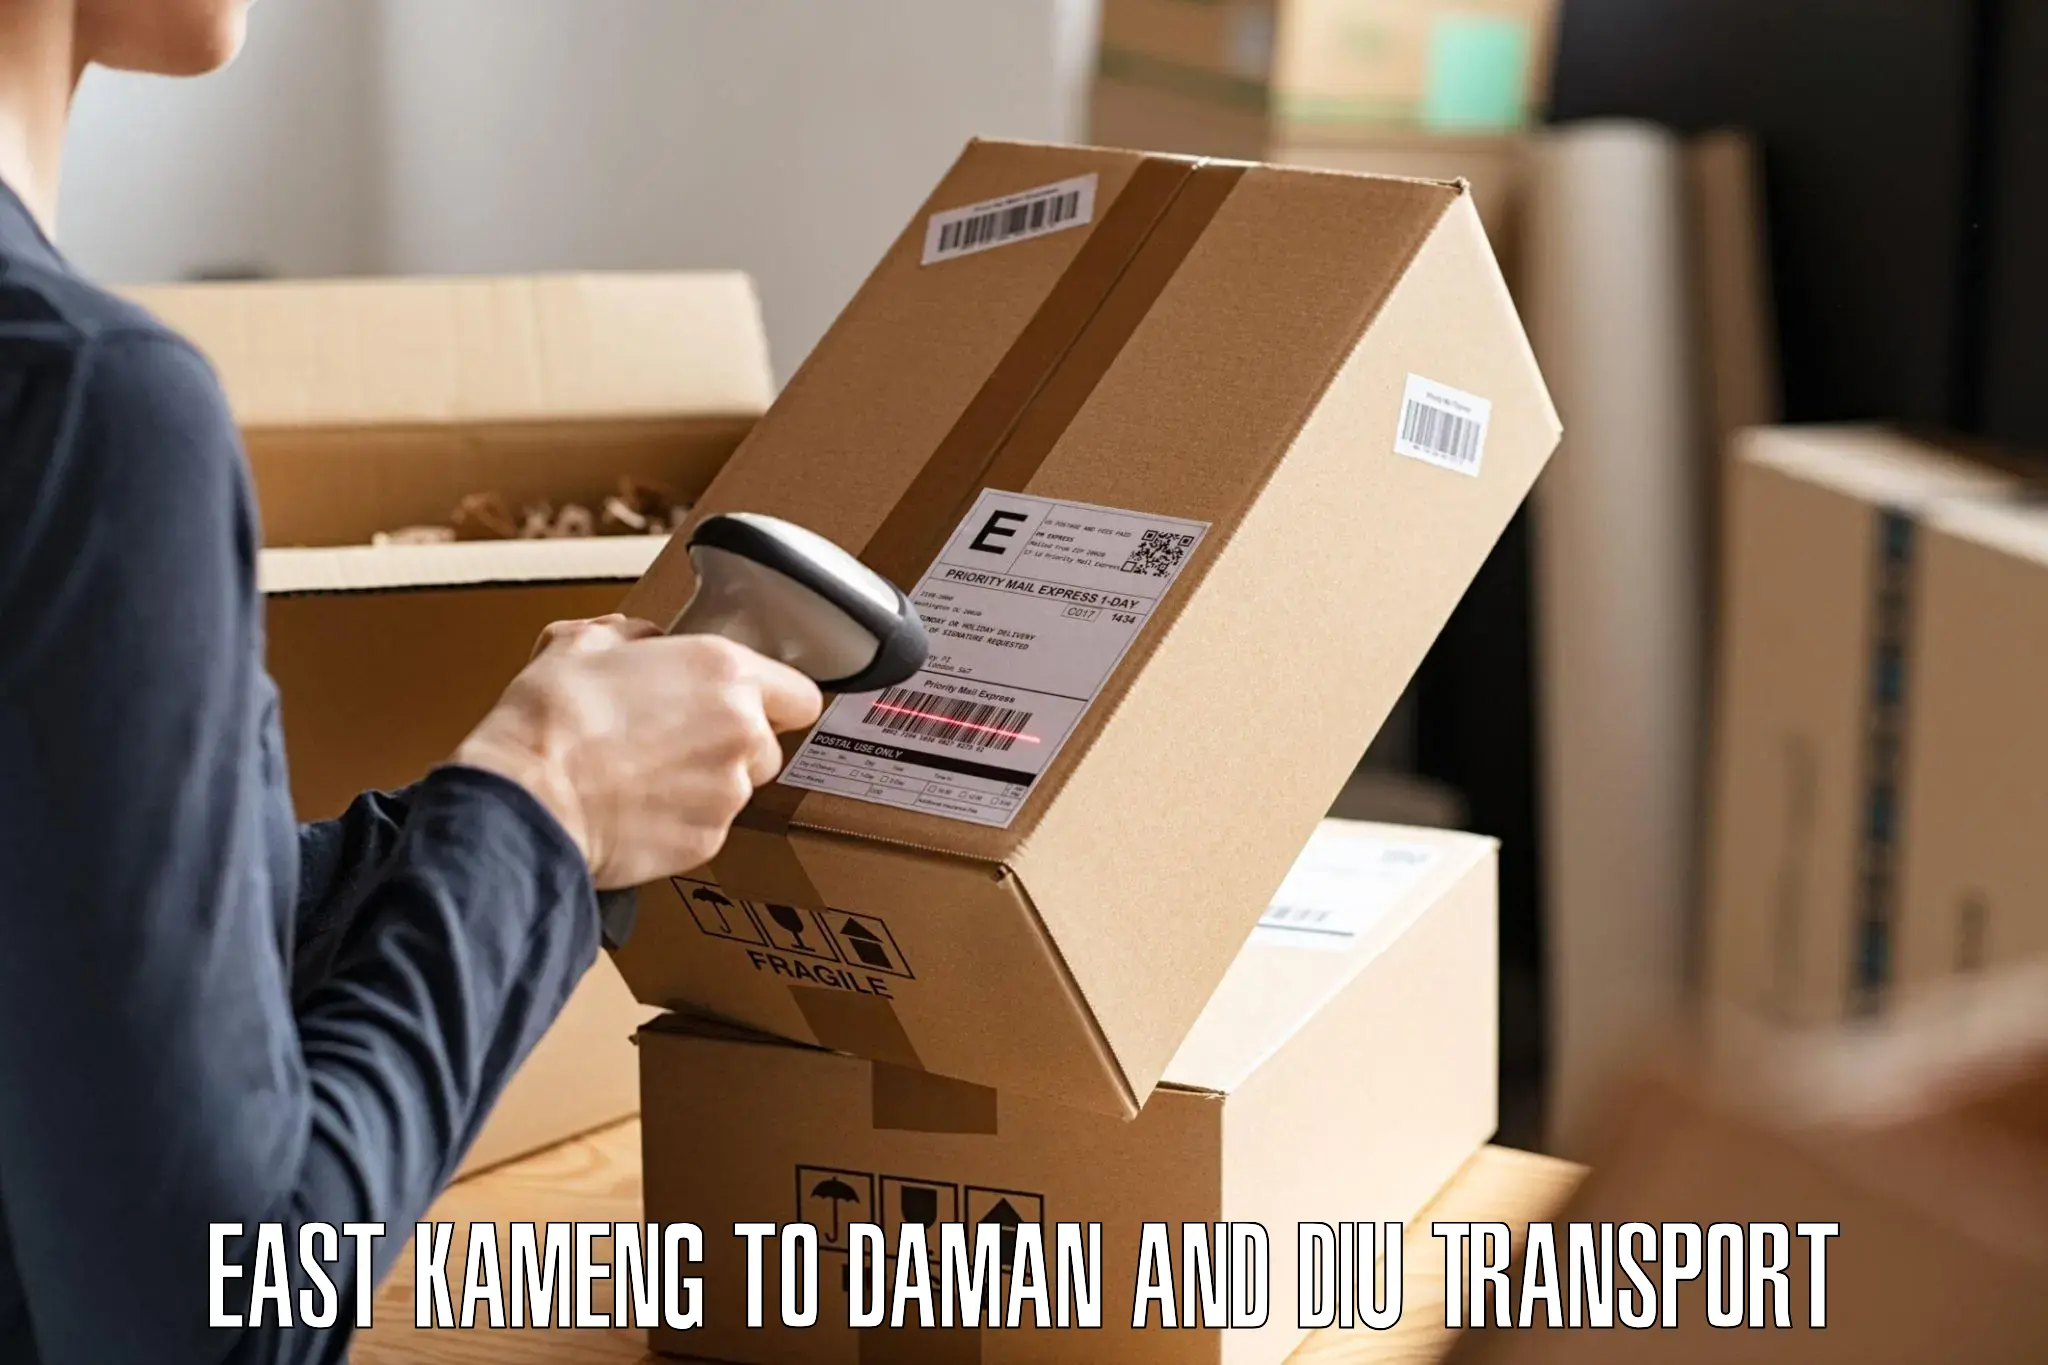 Commercial transport service East Kameng to Diu